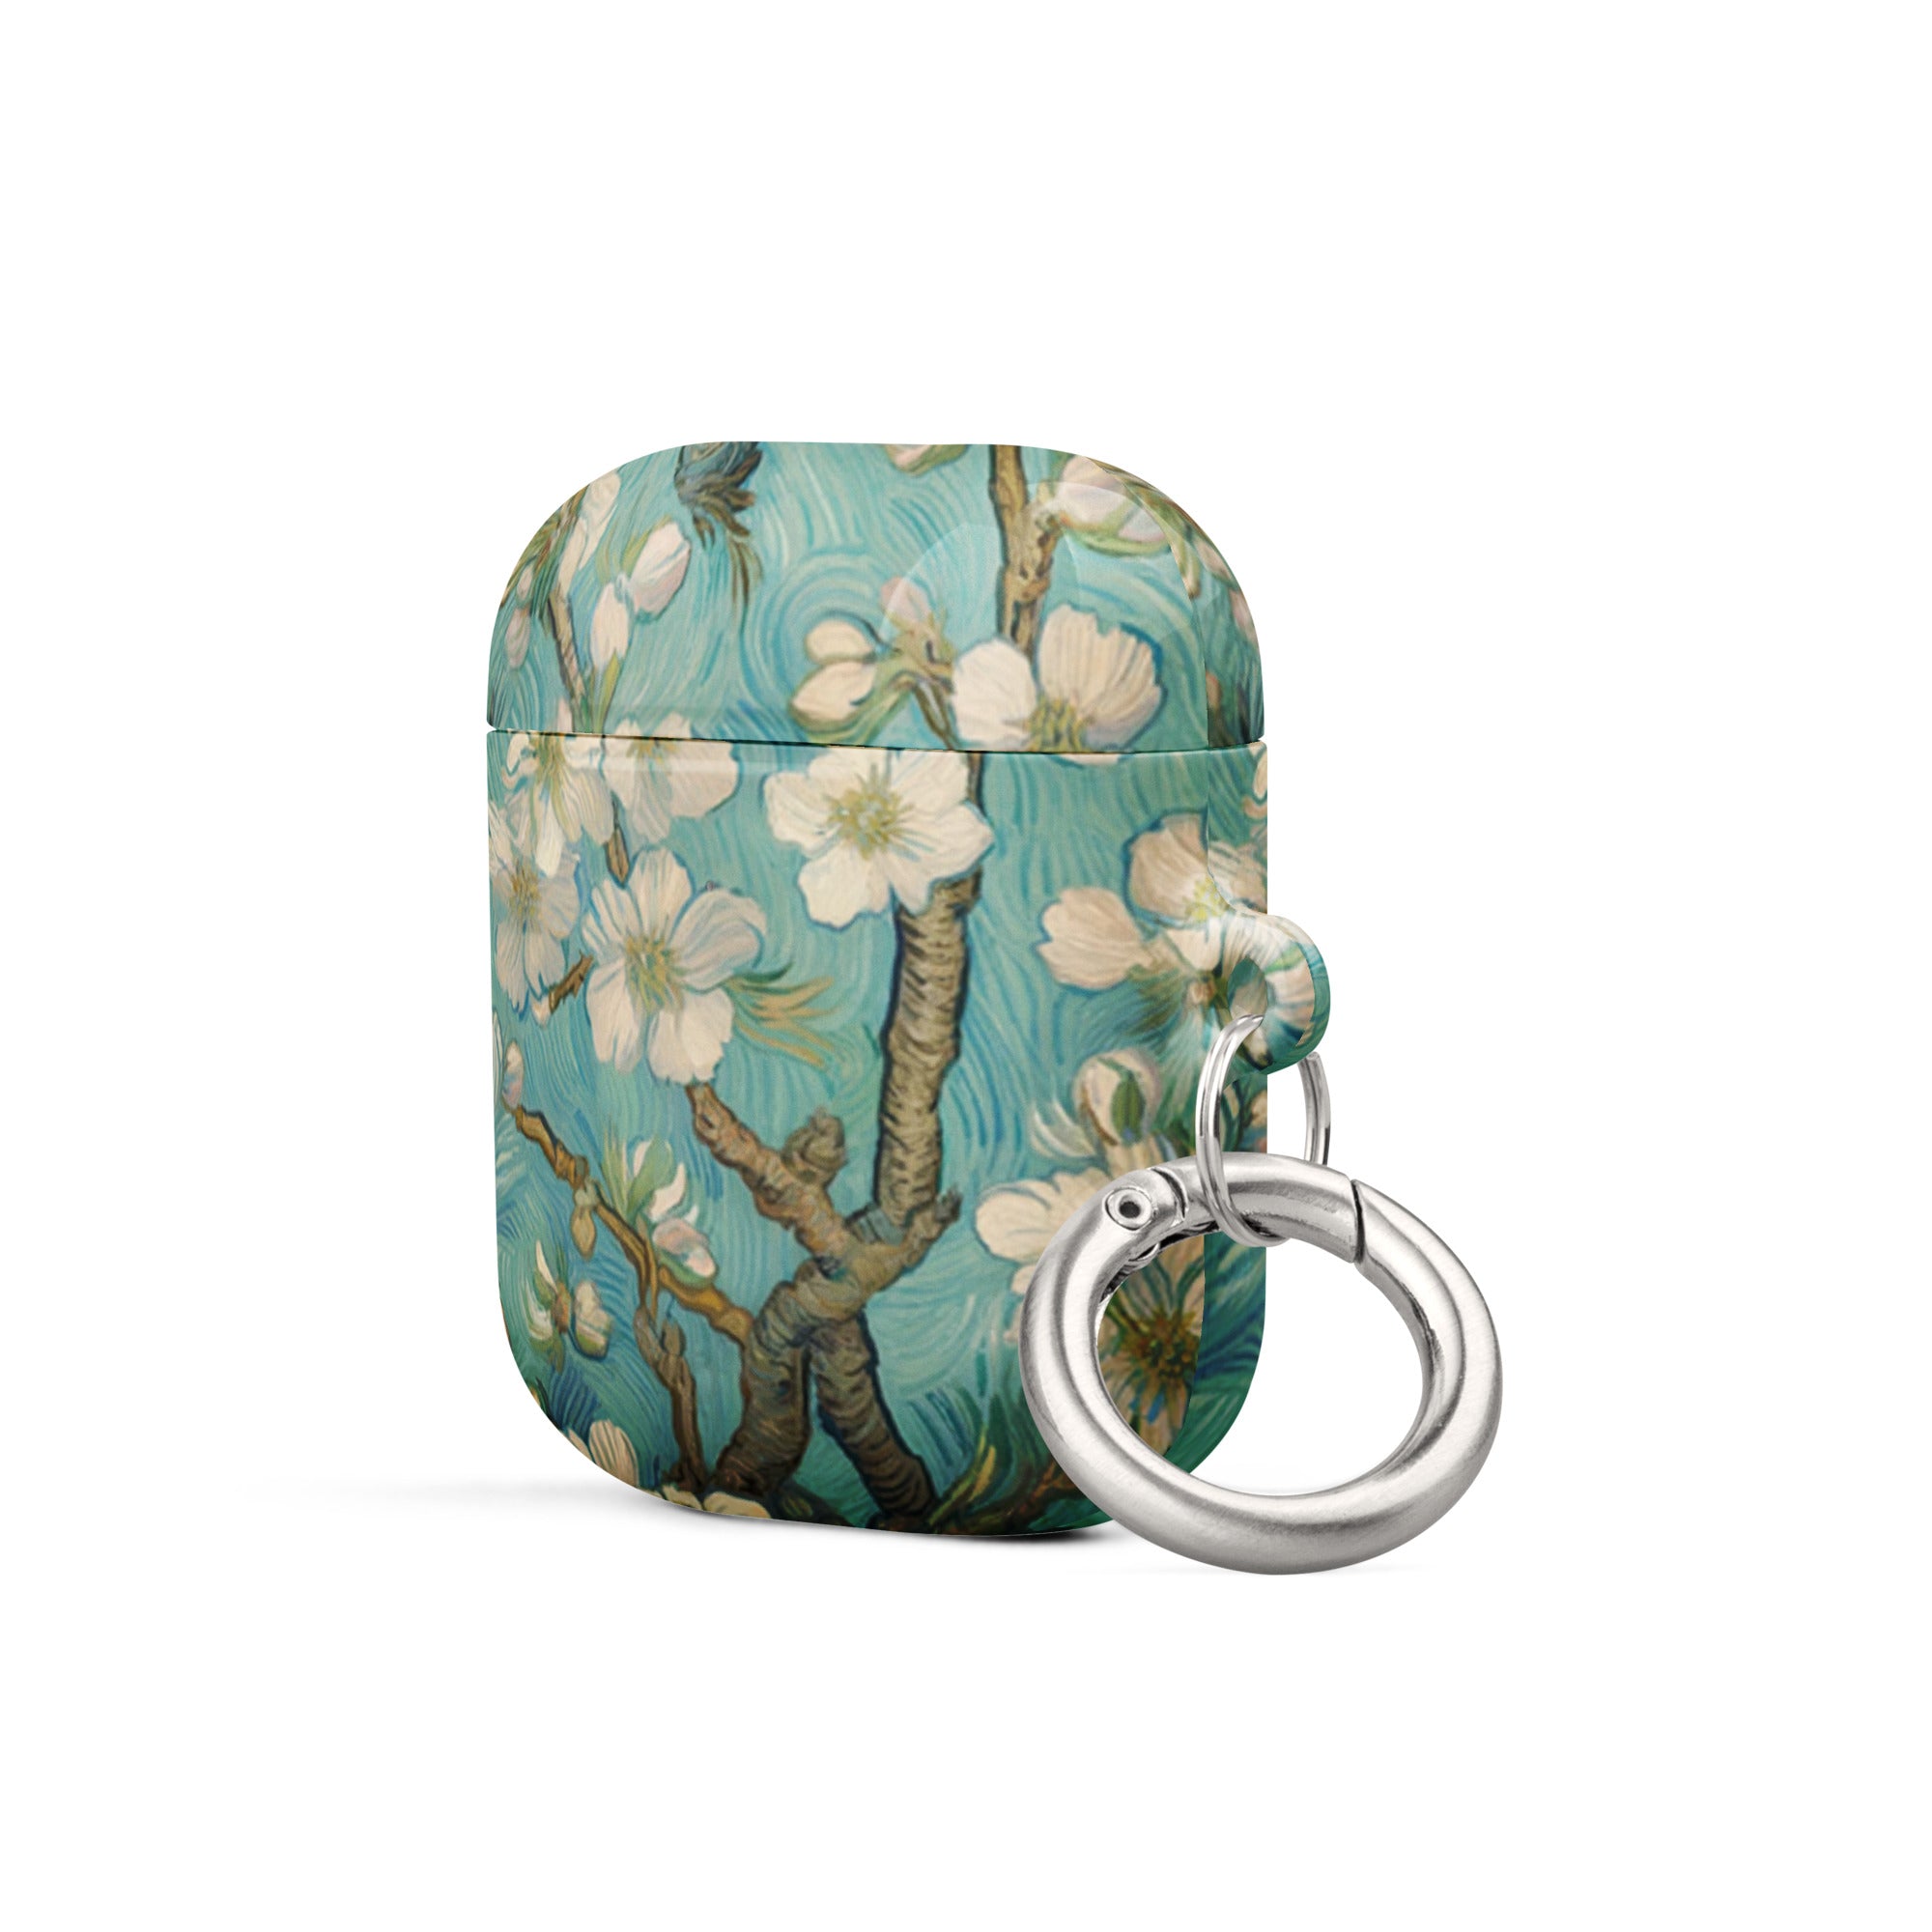 Vincent van Gogh 'Almond Blossom' Famous Painting AirPods® Case | Premium Art Case for AirPods®